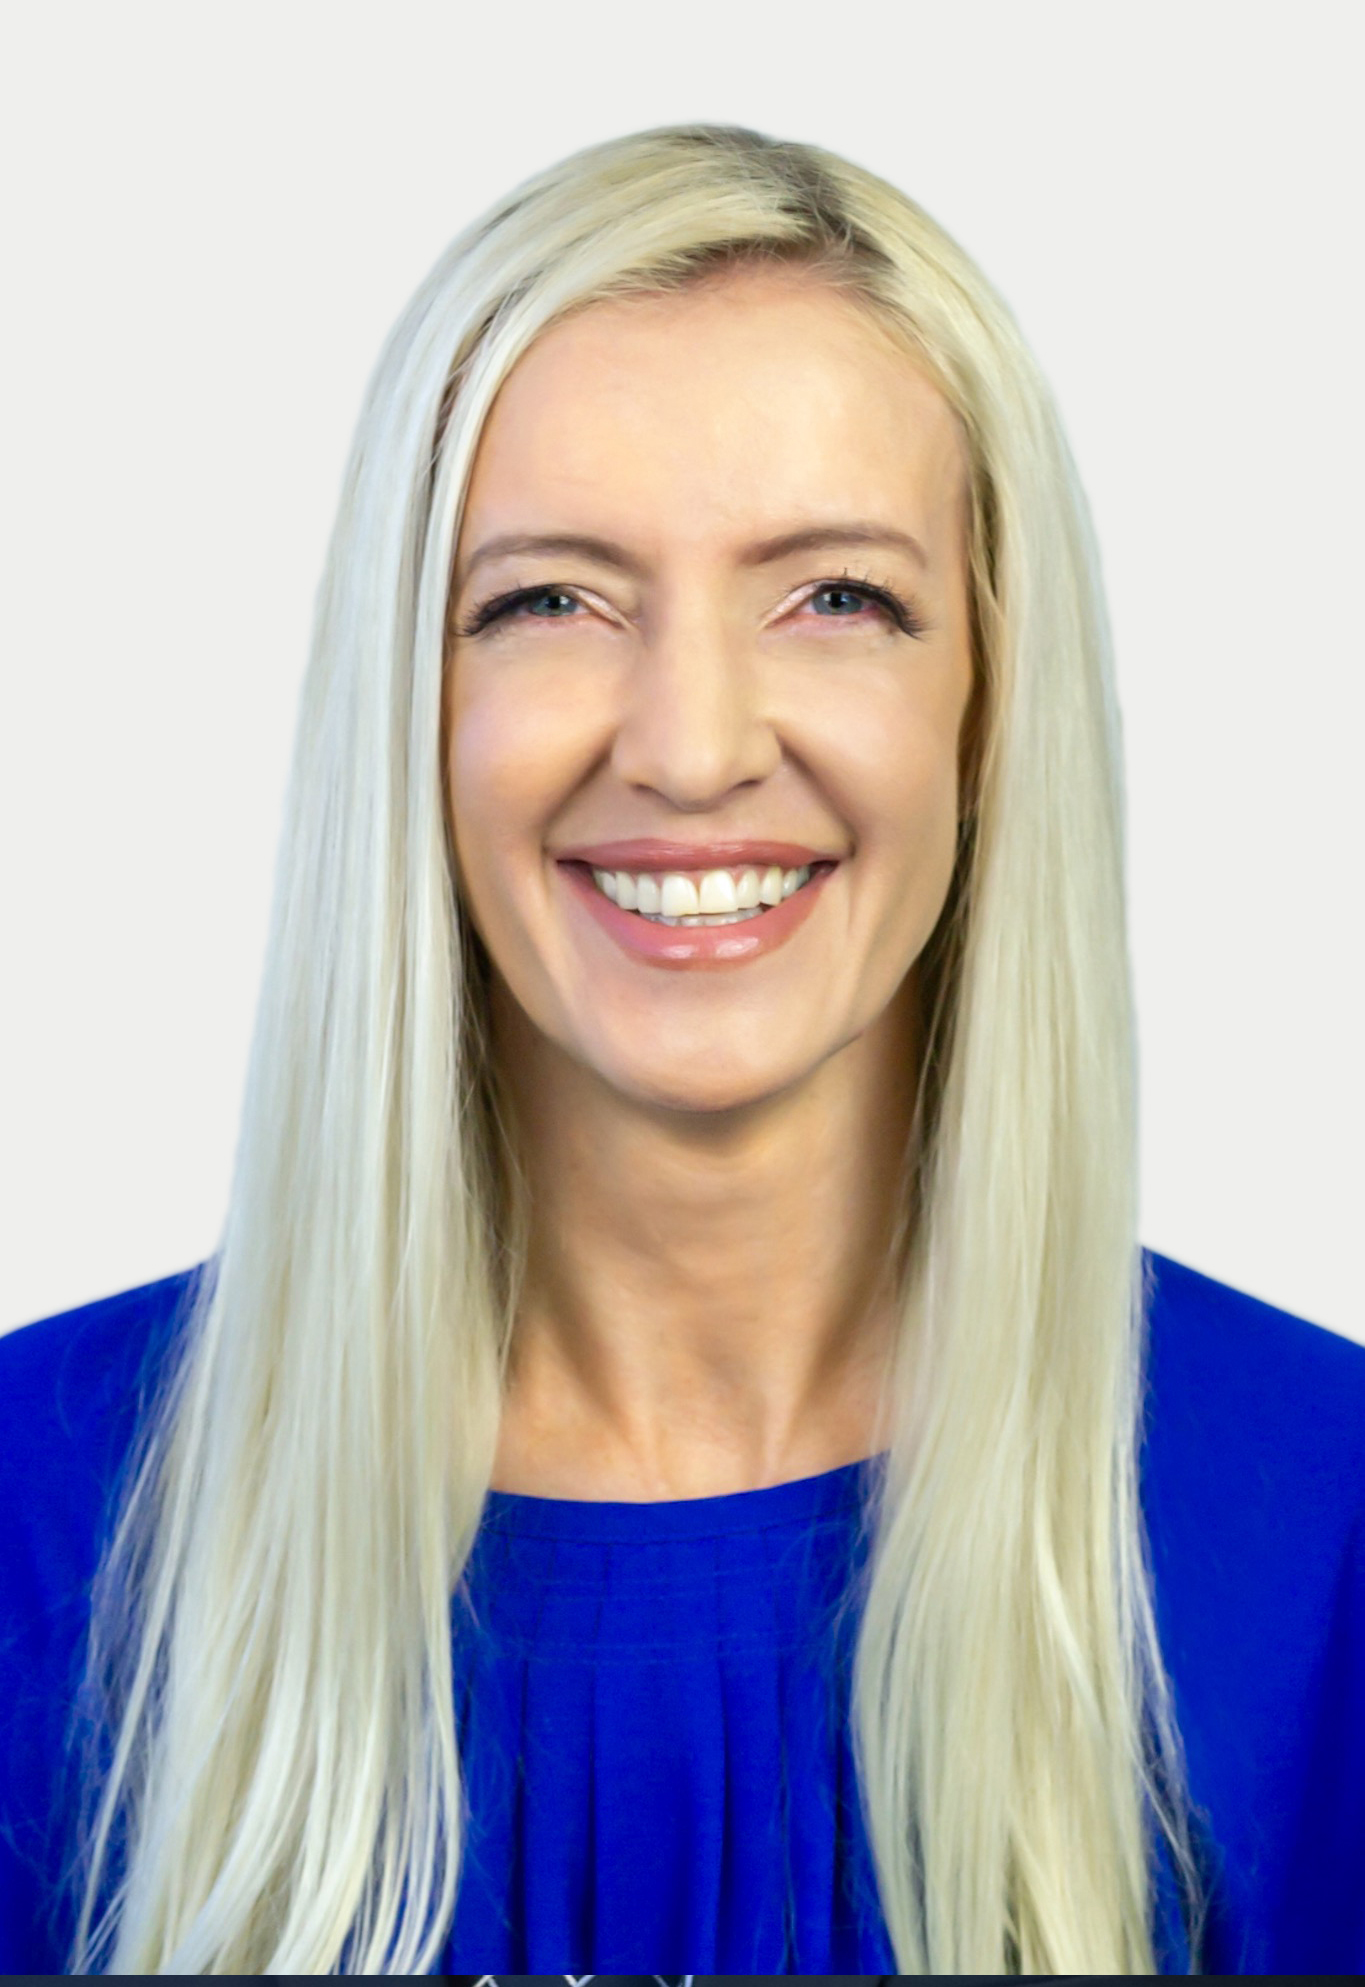 LOUISE BREYTENBACH - CHIEF OPERATING OFFICER